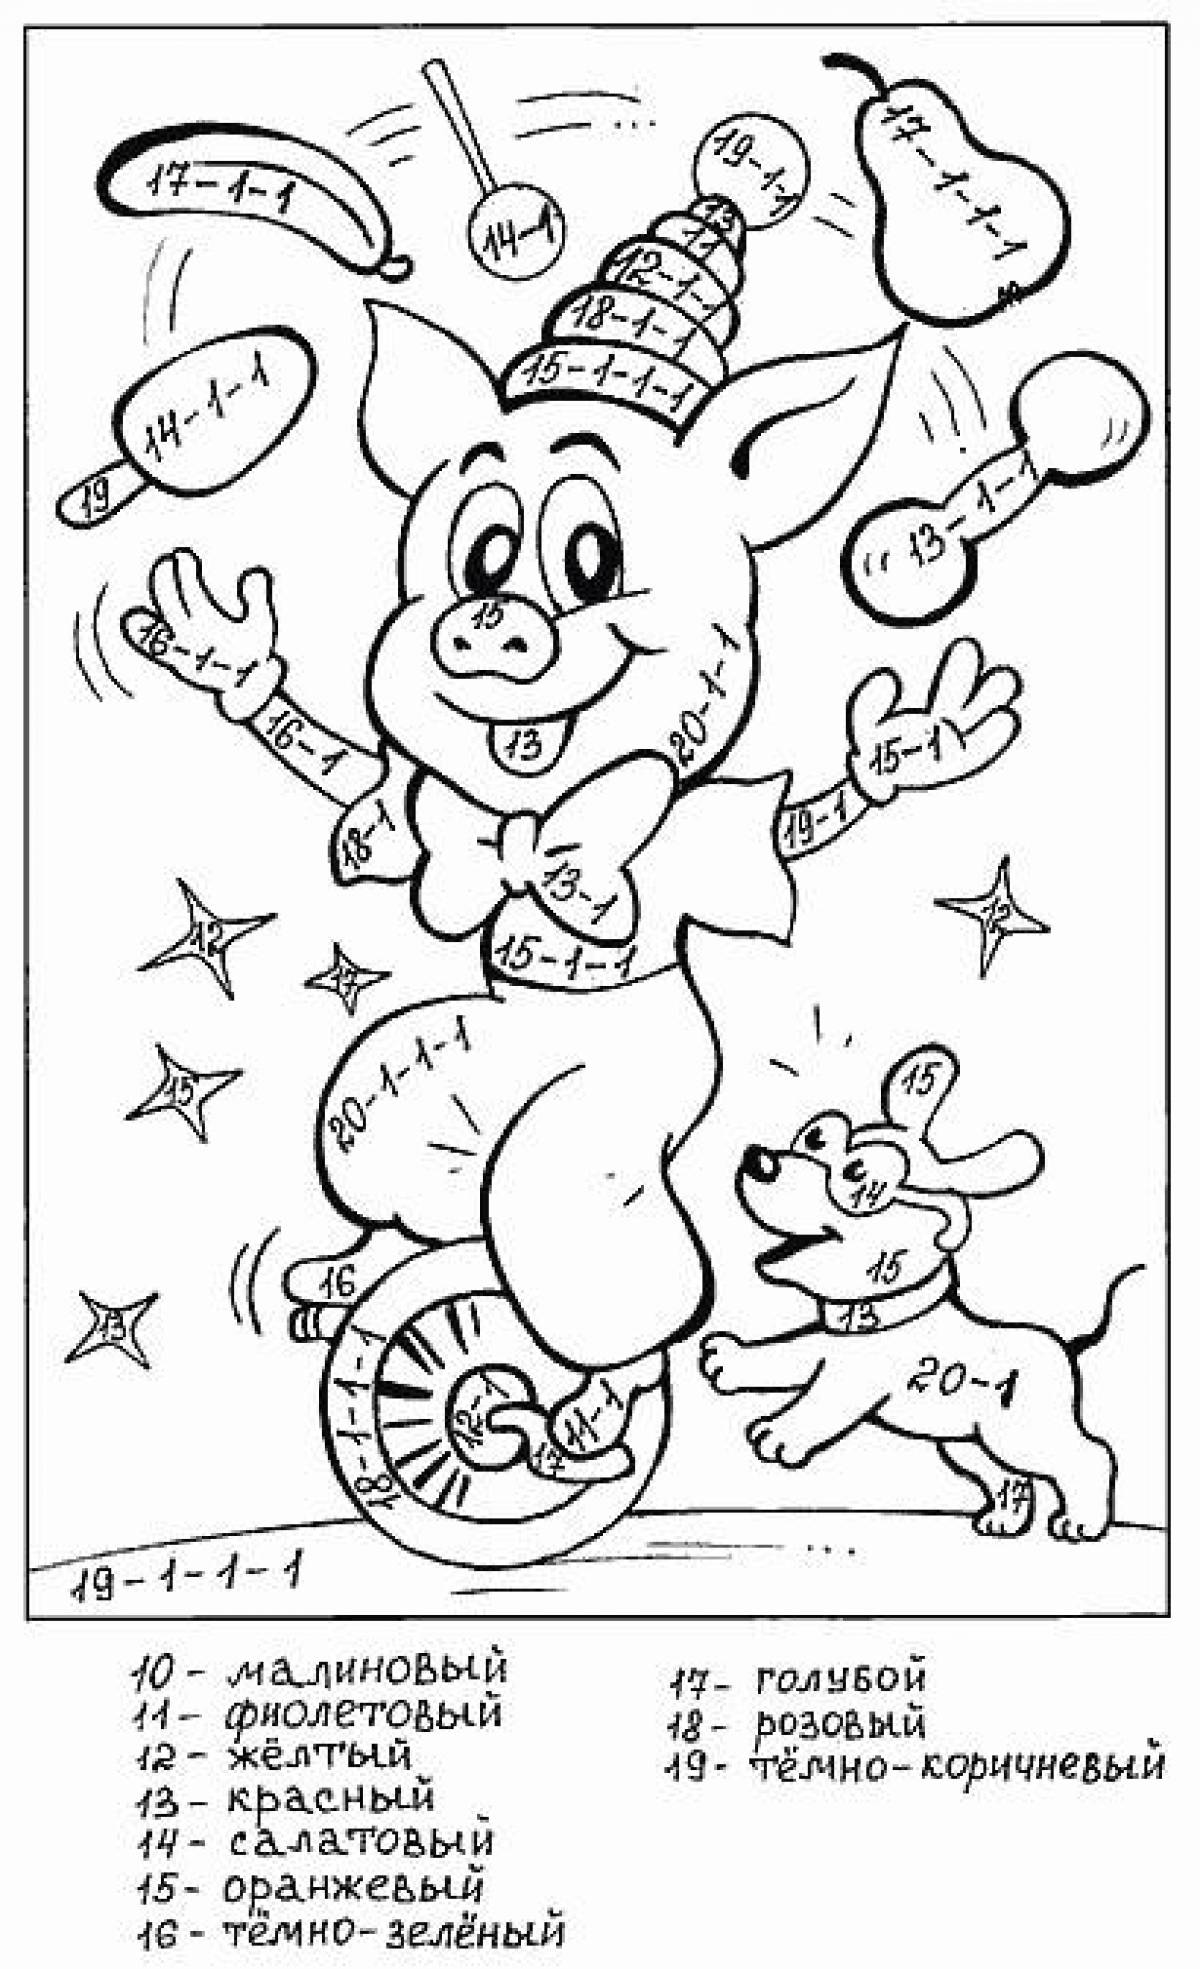 Coloring pages for grade 1 with funky examples